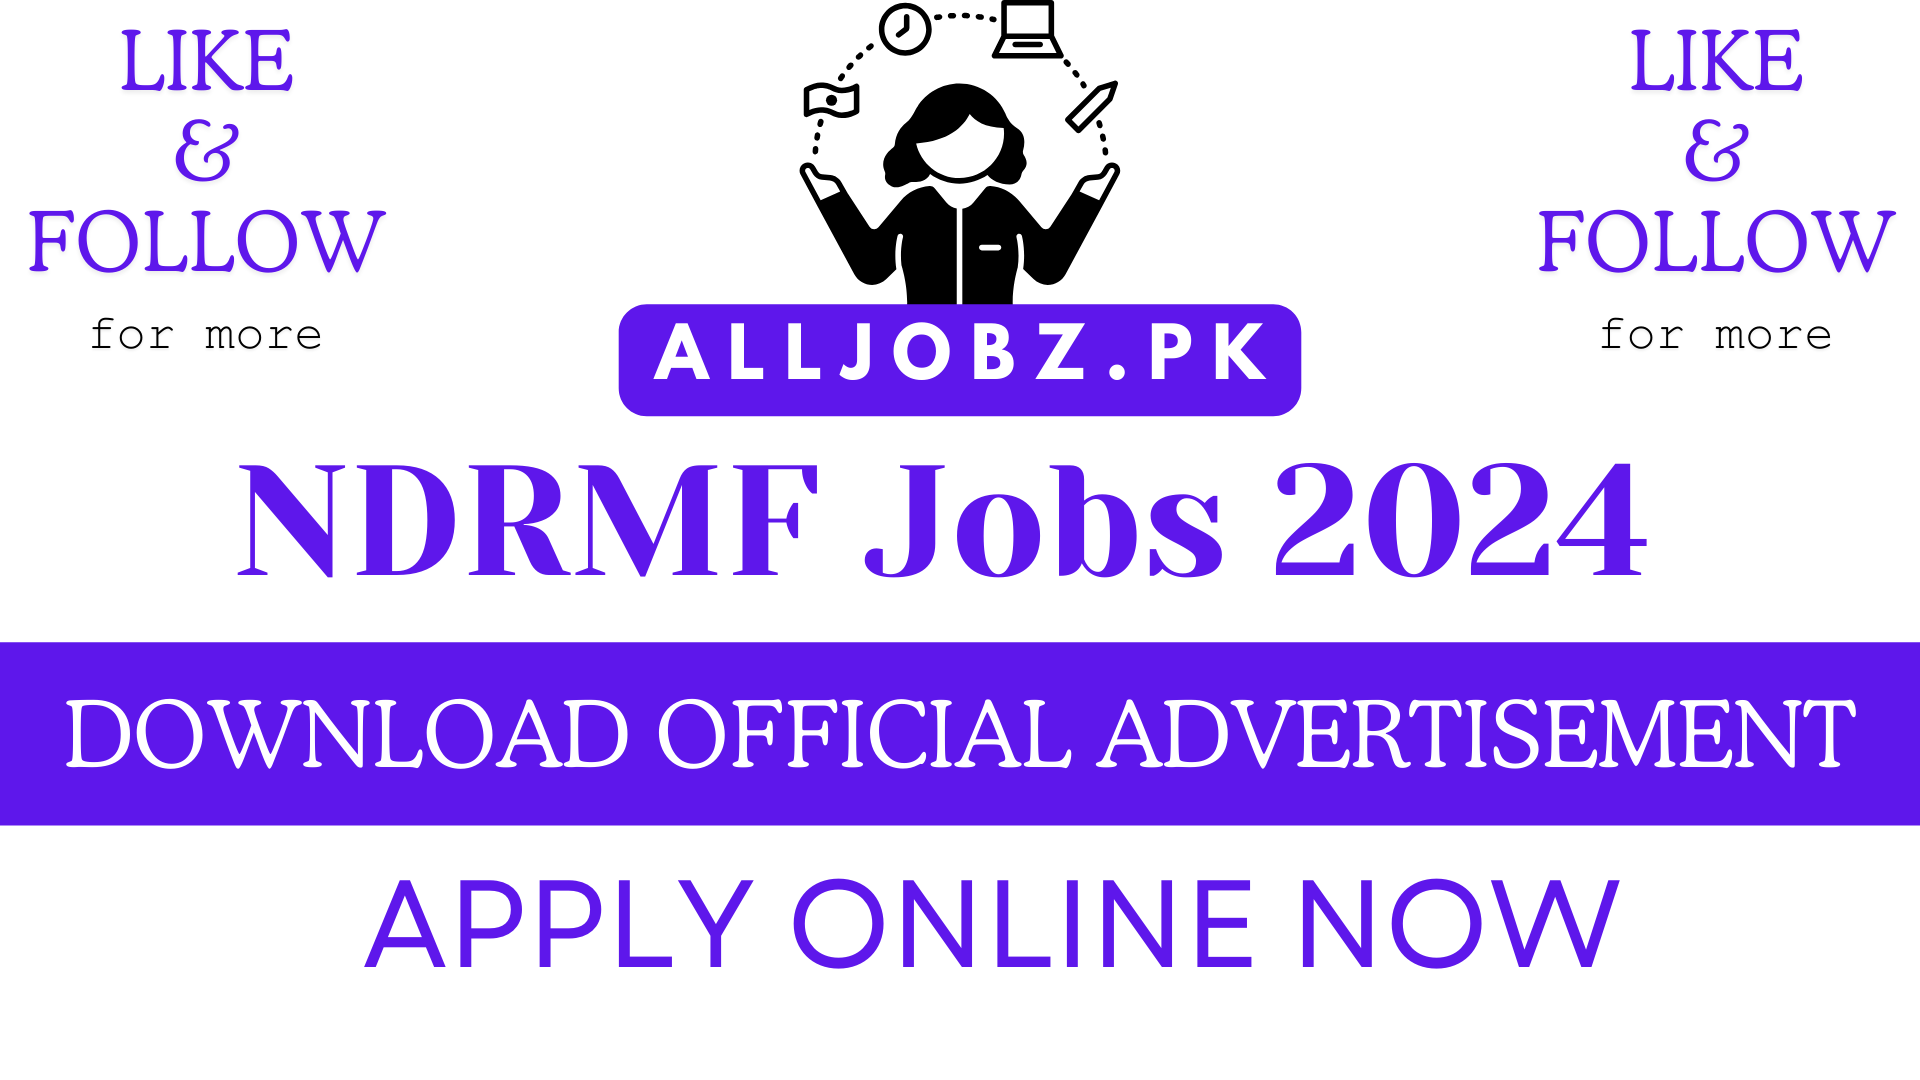 National Disaster Risk Management Fund Ndrmf Jobs 2024, National Disaster Risk Management Fund, Ndrmf, Temporary Vacancies, Ndrmf Jobs 2024, Ndrmf Jobs Salary, Ndrmf Jobs In Pakistan, Www.ndrmf.pk Internship, Ndrmf Ceo, Ndrmf Projects, Job Announcement, Disaster Resilience, Disaster Risk Management, Government-Owned Organization, Not-For-Profit Company, Section 42, Companies Act 2017, Climatic Hazards, Natural Hazards, Disaster Response Capabilities, Gis Developer, Modeling Expert, Natcat Risk Modeling, Gis Expert, Natcat Data Center, System Administrator, Network Administrator, It Expert, Resource Person, Support Services, Admin &Amp; Security, Six-Month Contract, Qualification, Experience, Application Process, Apply Online, Deadline, Terms &Amp; Conditions, Shortlisted Candidates, Higher Education Commission, Equal Opportunity Employer, Contact Information, Official Advertisement